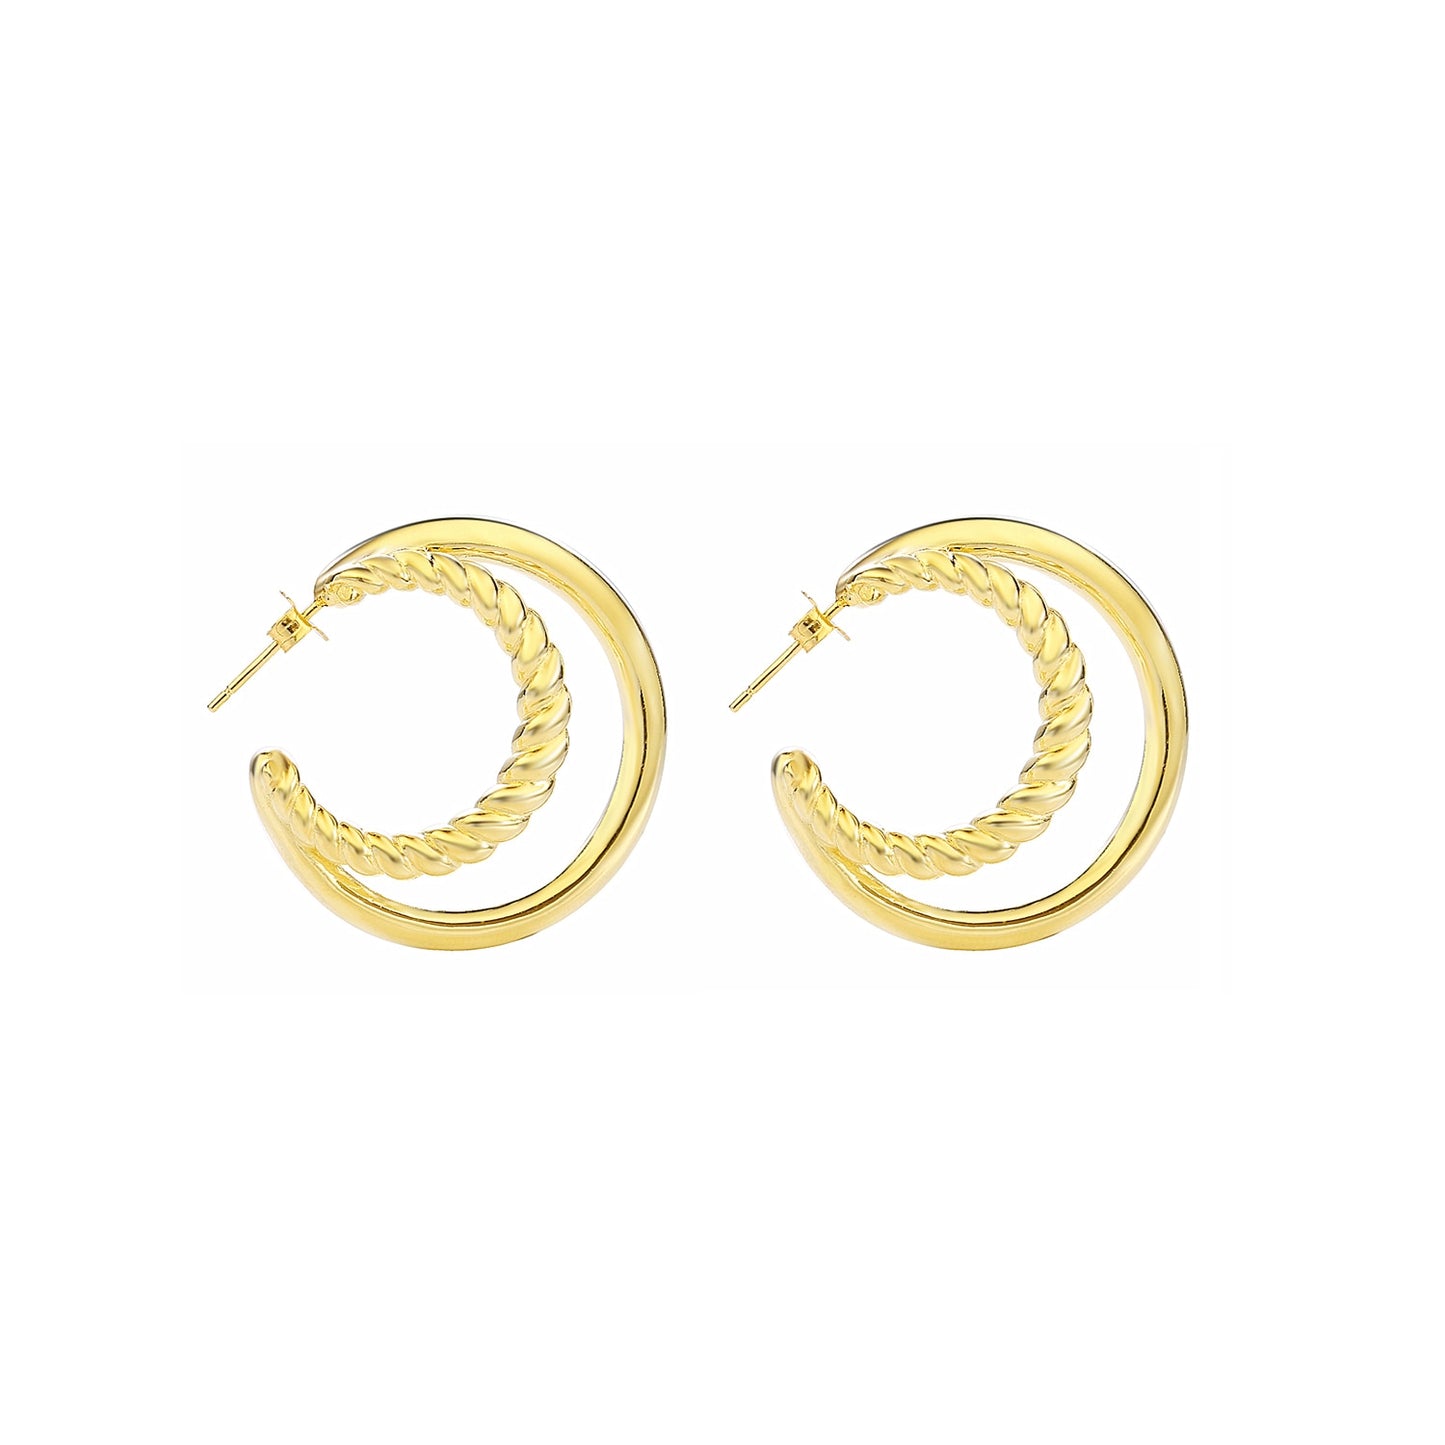 Slovecabin 925 Sterling Silver Luxury Hoop Piercing Boucle Doreille Femme Gold Round Circle Fashion Earrings for Women Jewerly